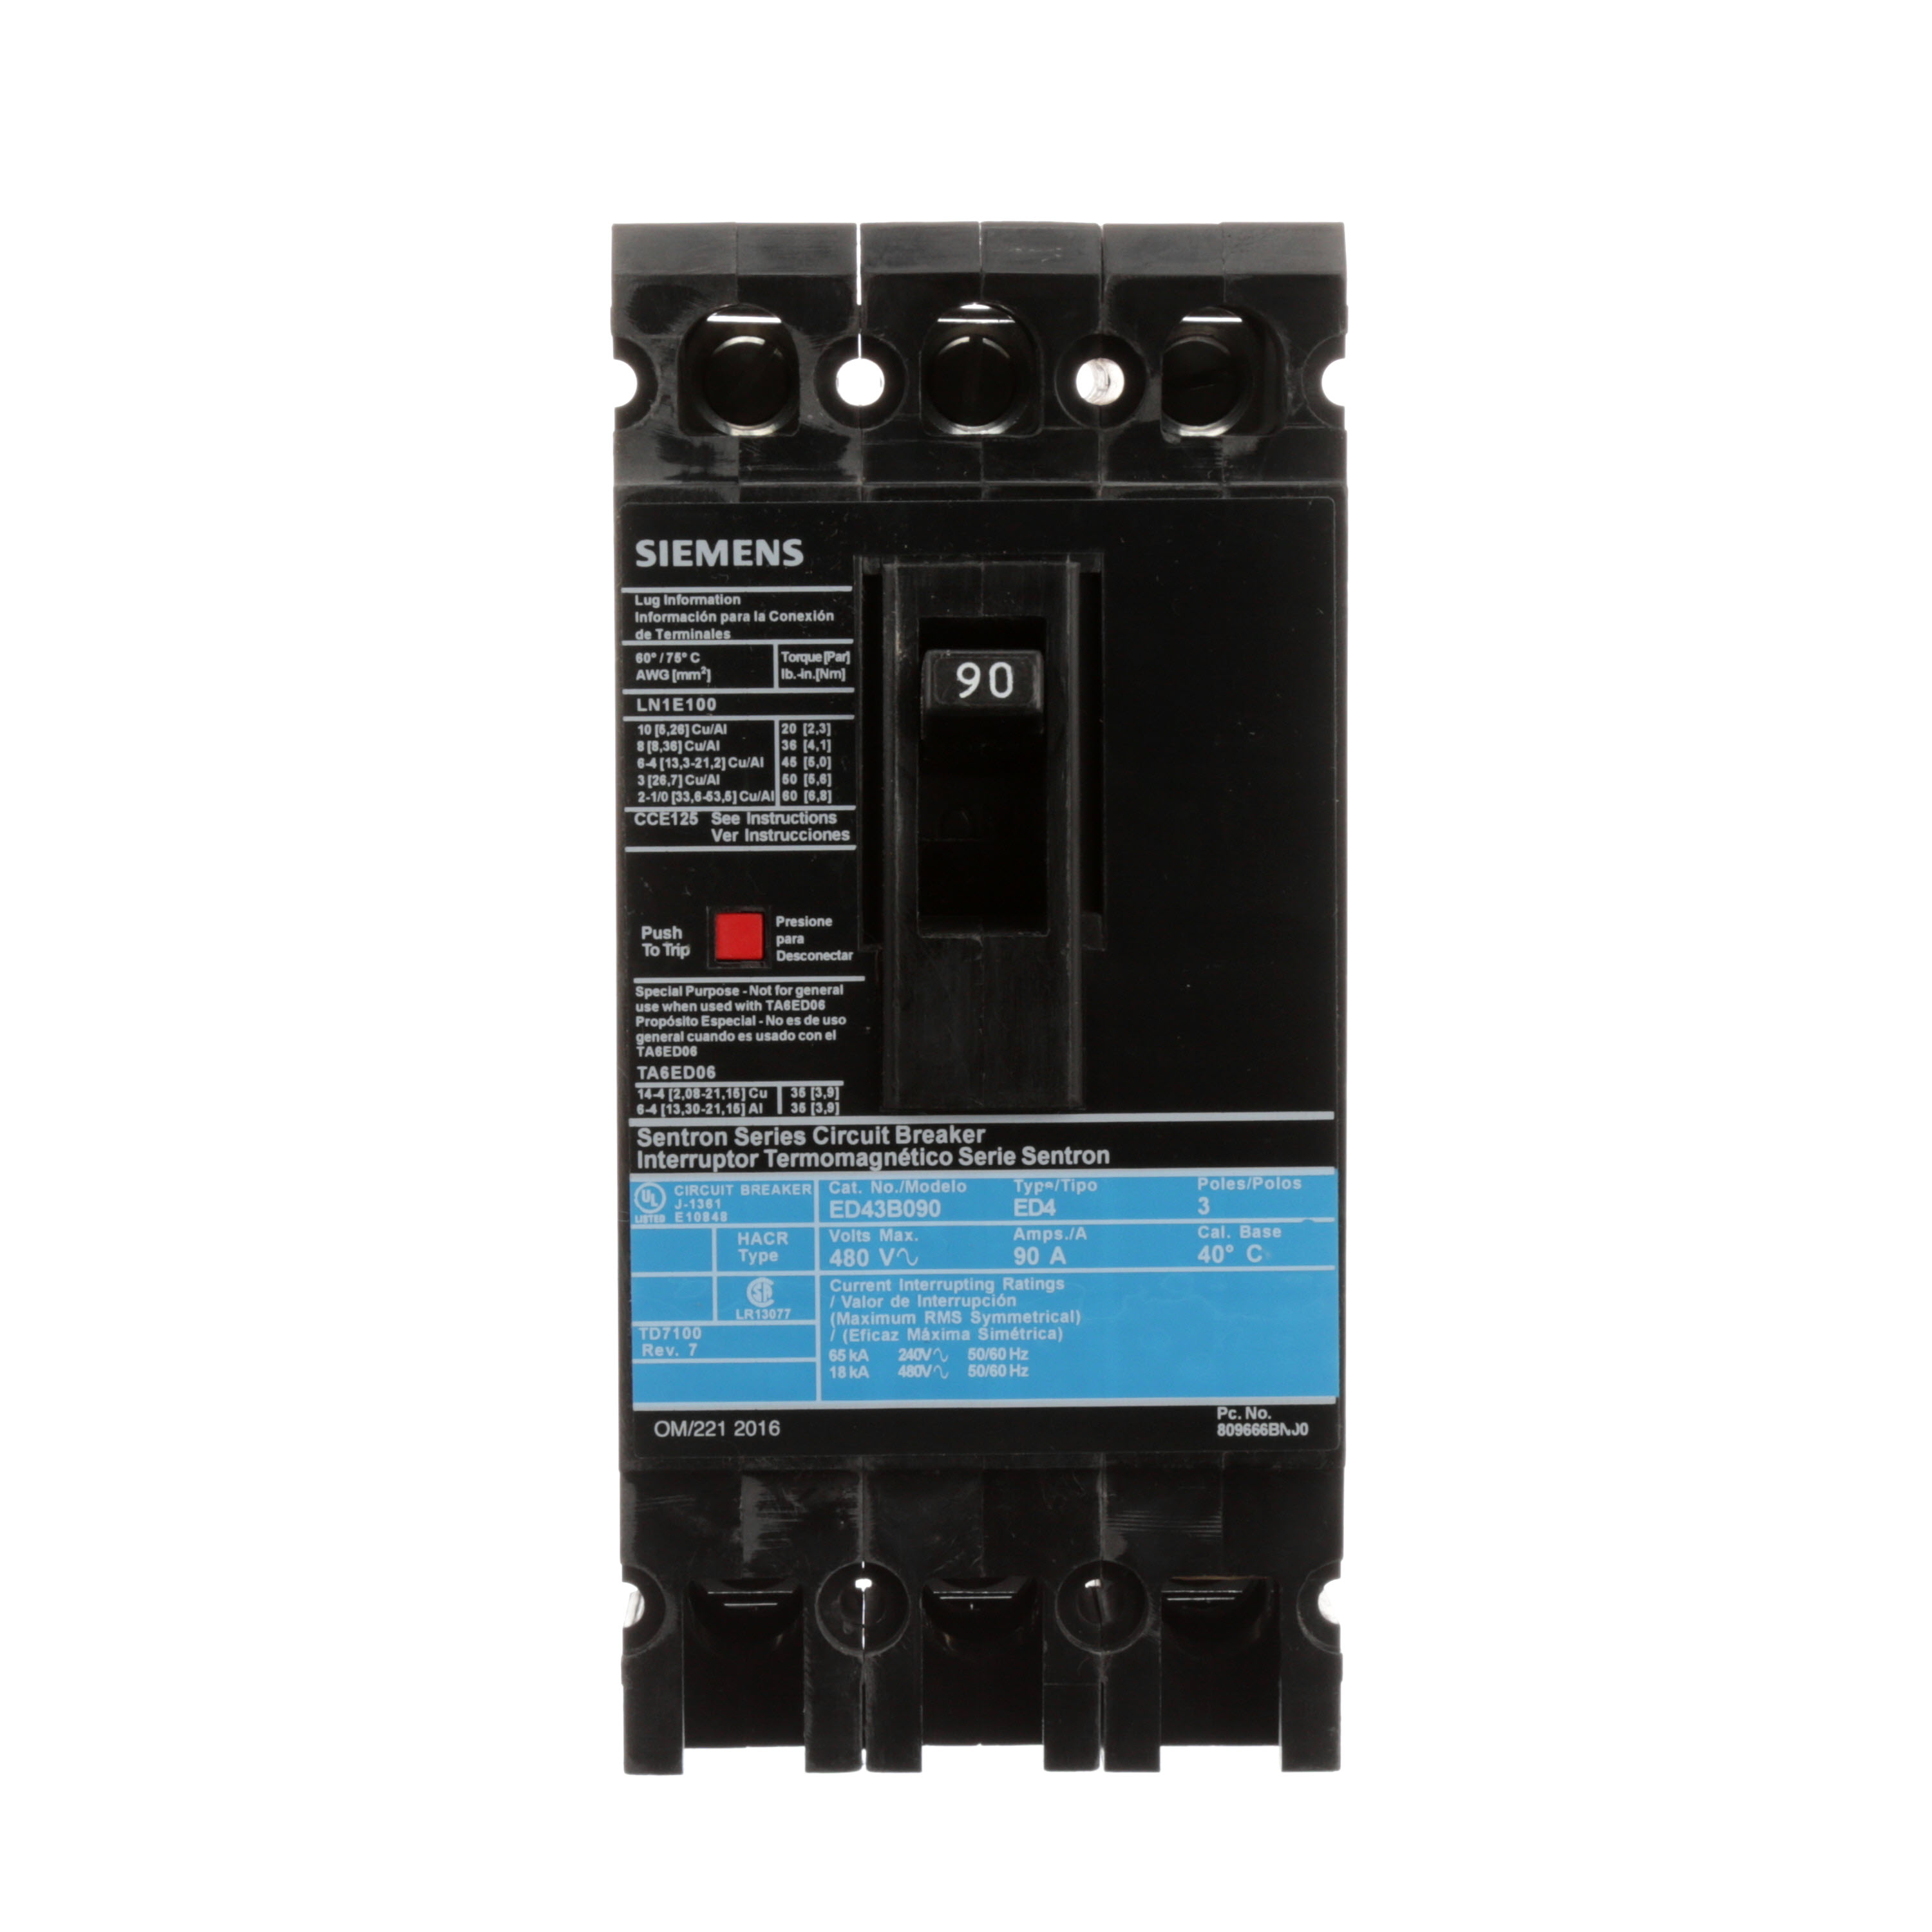 SIEMENS LOW VOLTAGE SENTRON MOLDED CASE CIRCUIT BREAKER WITH THERMAL - MAGNETICTRIP UNIT. STANDARD 40 DEG C BREAKER ED FRAME WITH STANDARD BREAKING CAPACITY. 90A 3-POLE (18KAIC AT 480V). NON-INTERCHANGEABLE TRIP UNIT. SPECIAL FEATURES LINE AND LOAD SIDE LUGS (LN1E100) WIRE RANGE 10 - 1/0AWG (CU/AL). DIMENSIONS (W x Hx D) IN 3.00 x 6.4 x 3.92.